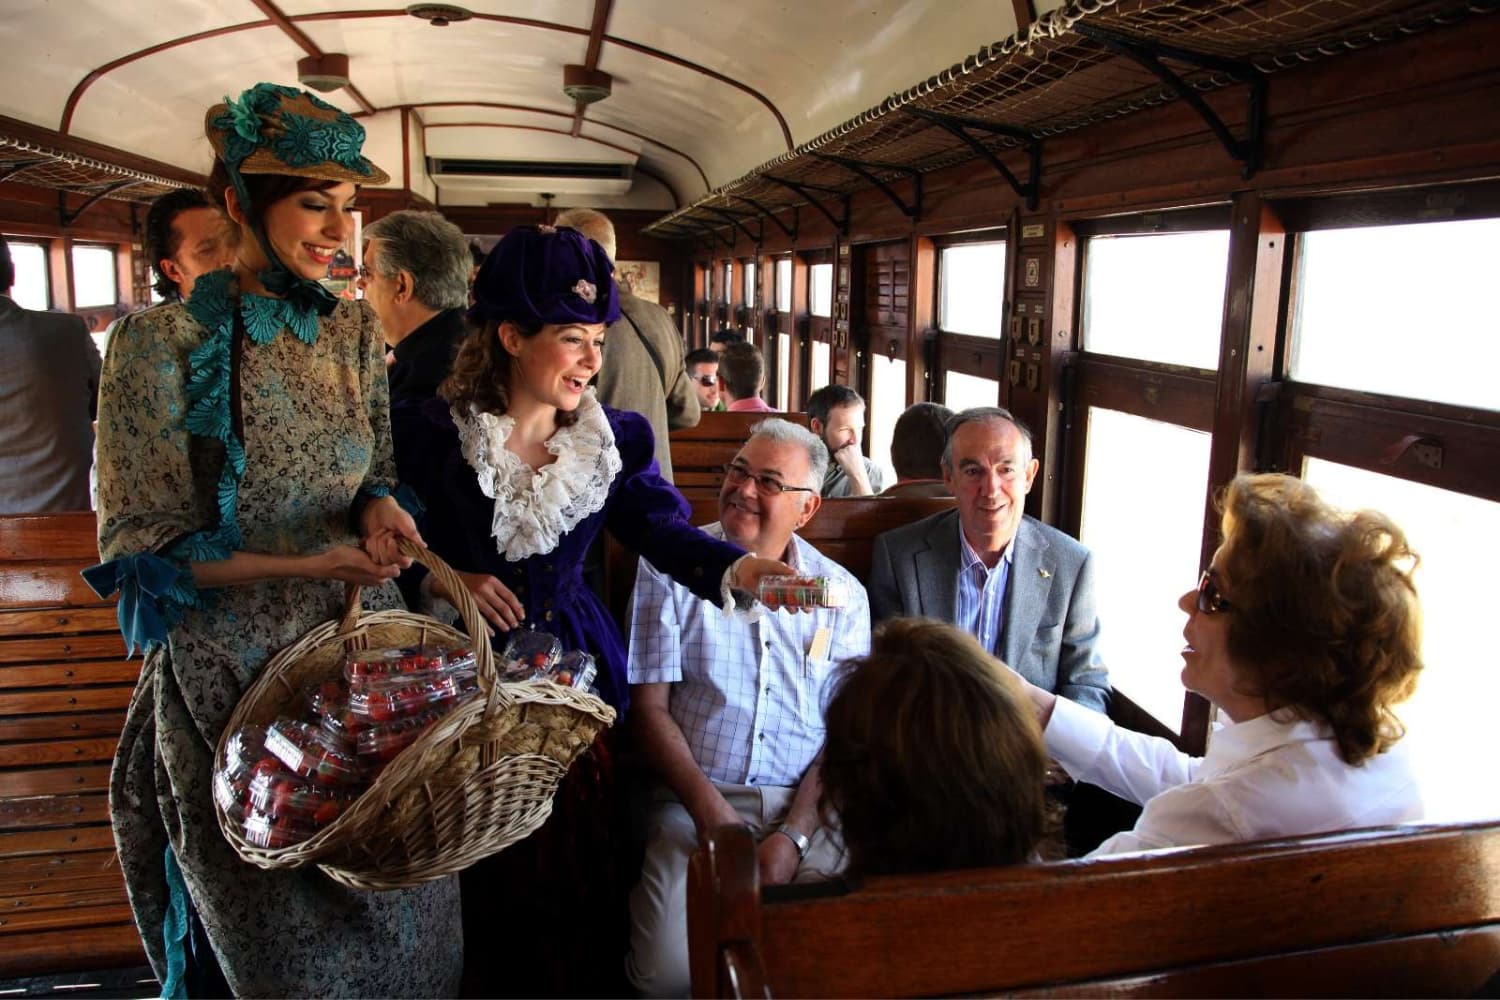 A trip back in time with Madrid's tourist trains